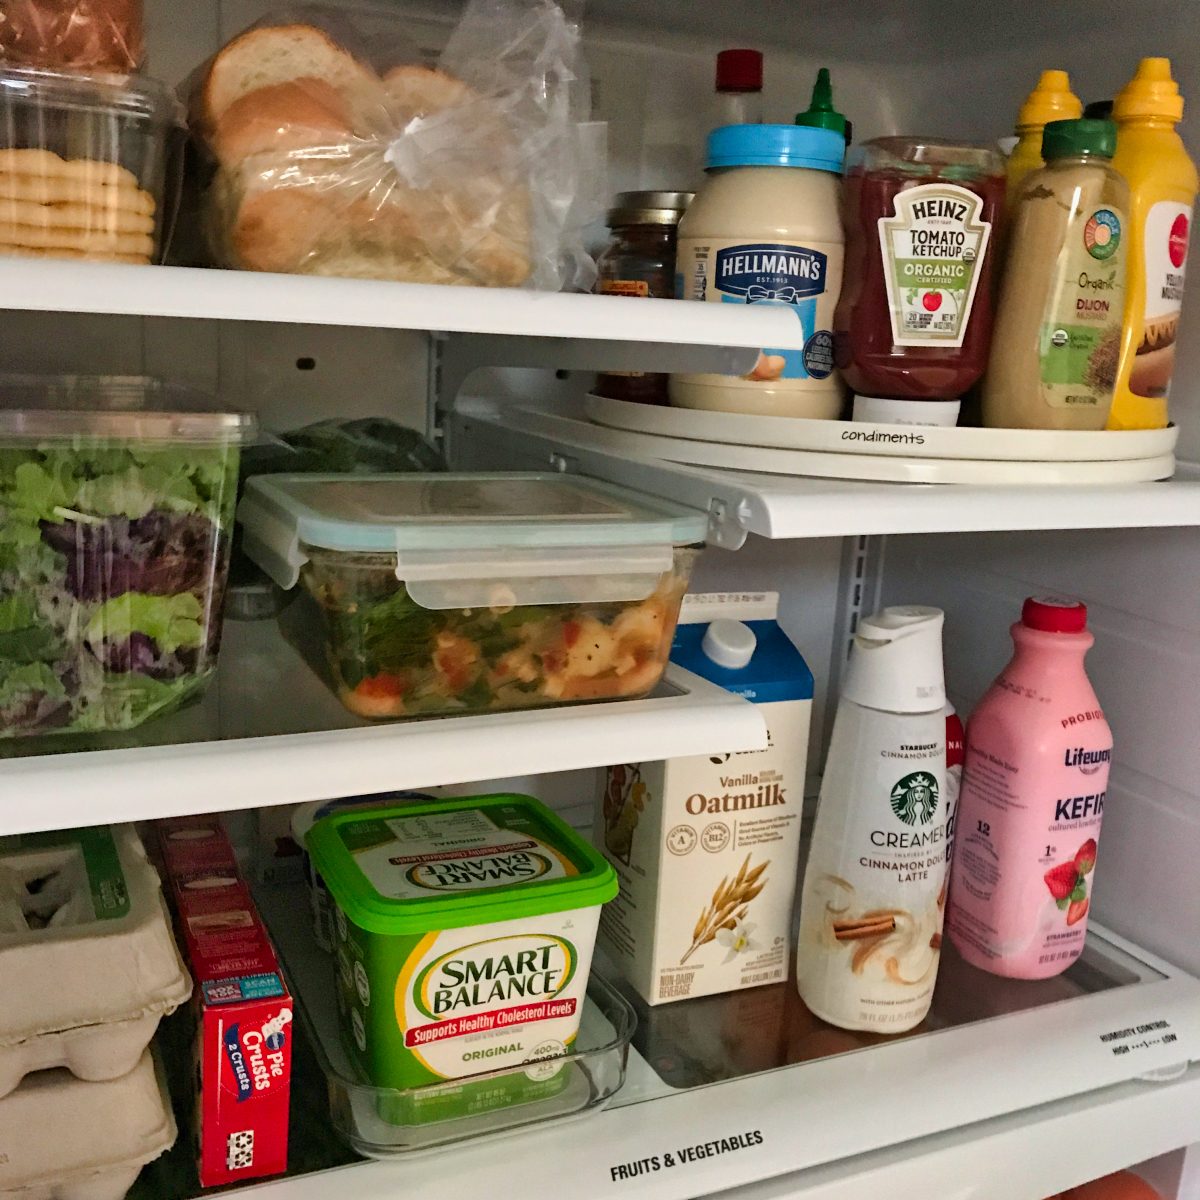 How to Organize Your Refrigerator From Start to Finish